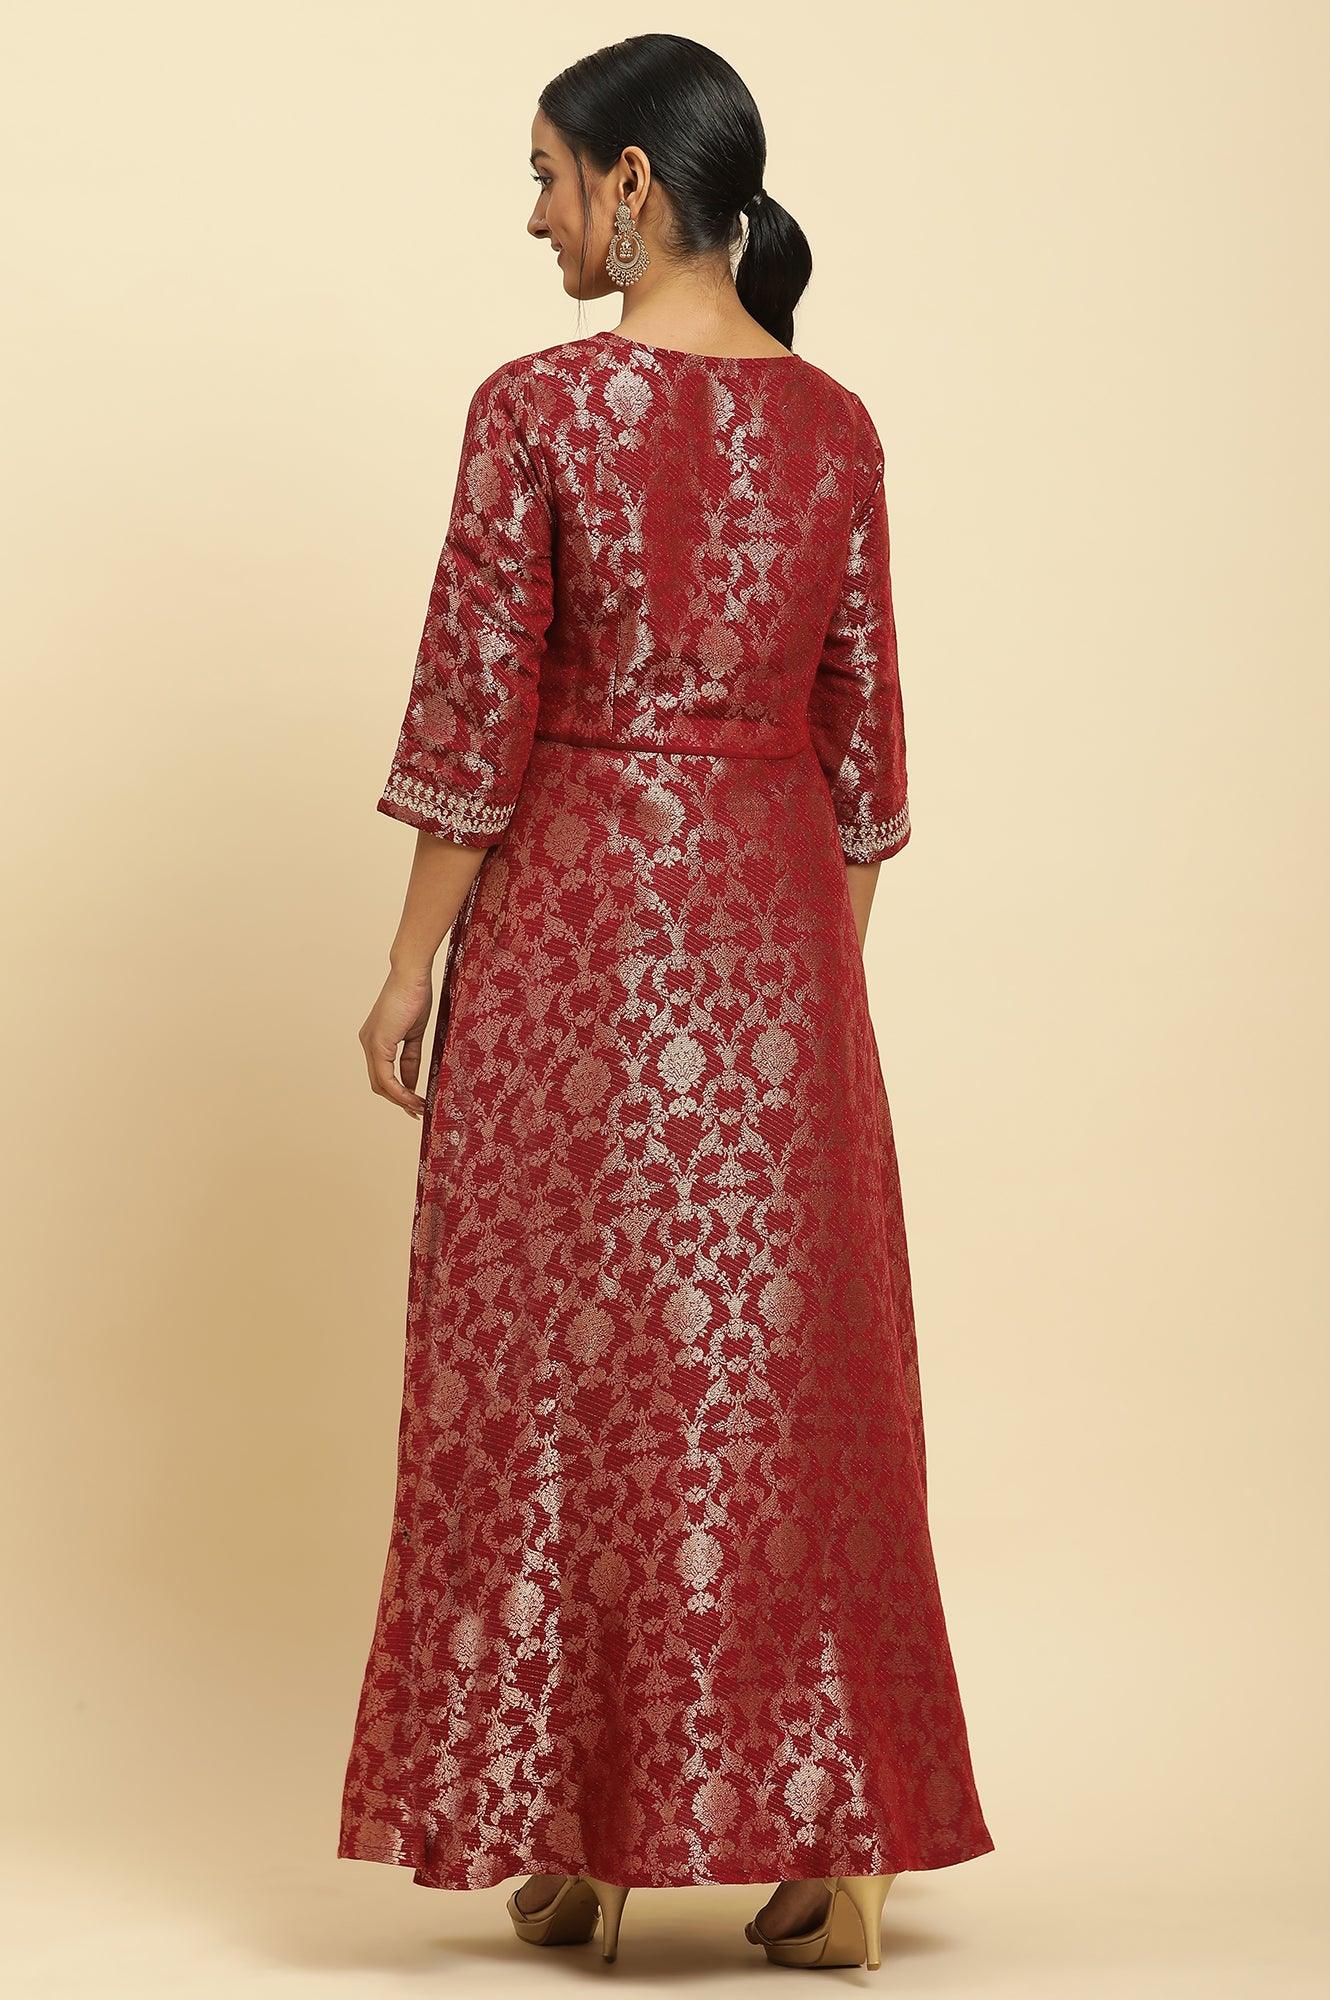 Red Jacquard Embroidered Ethnic Dress - wforwoman